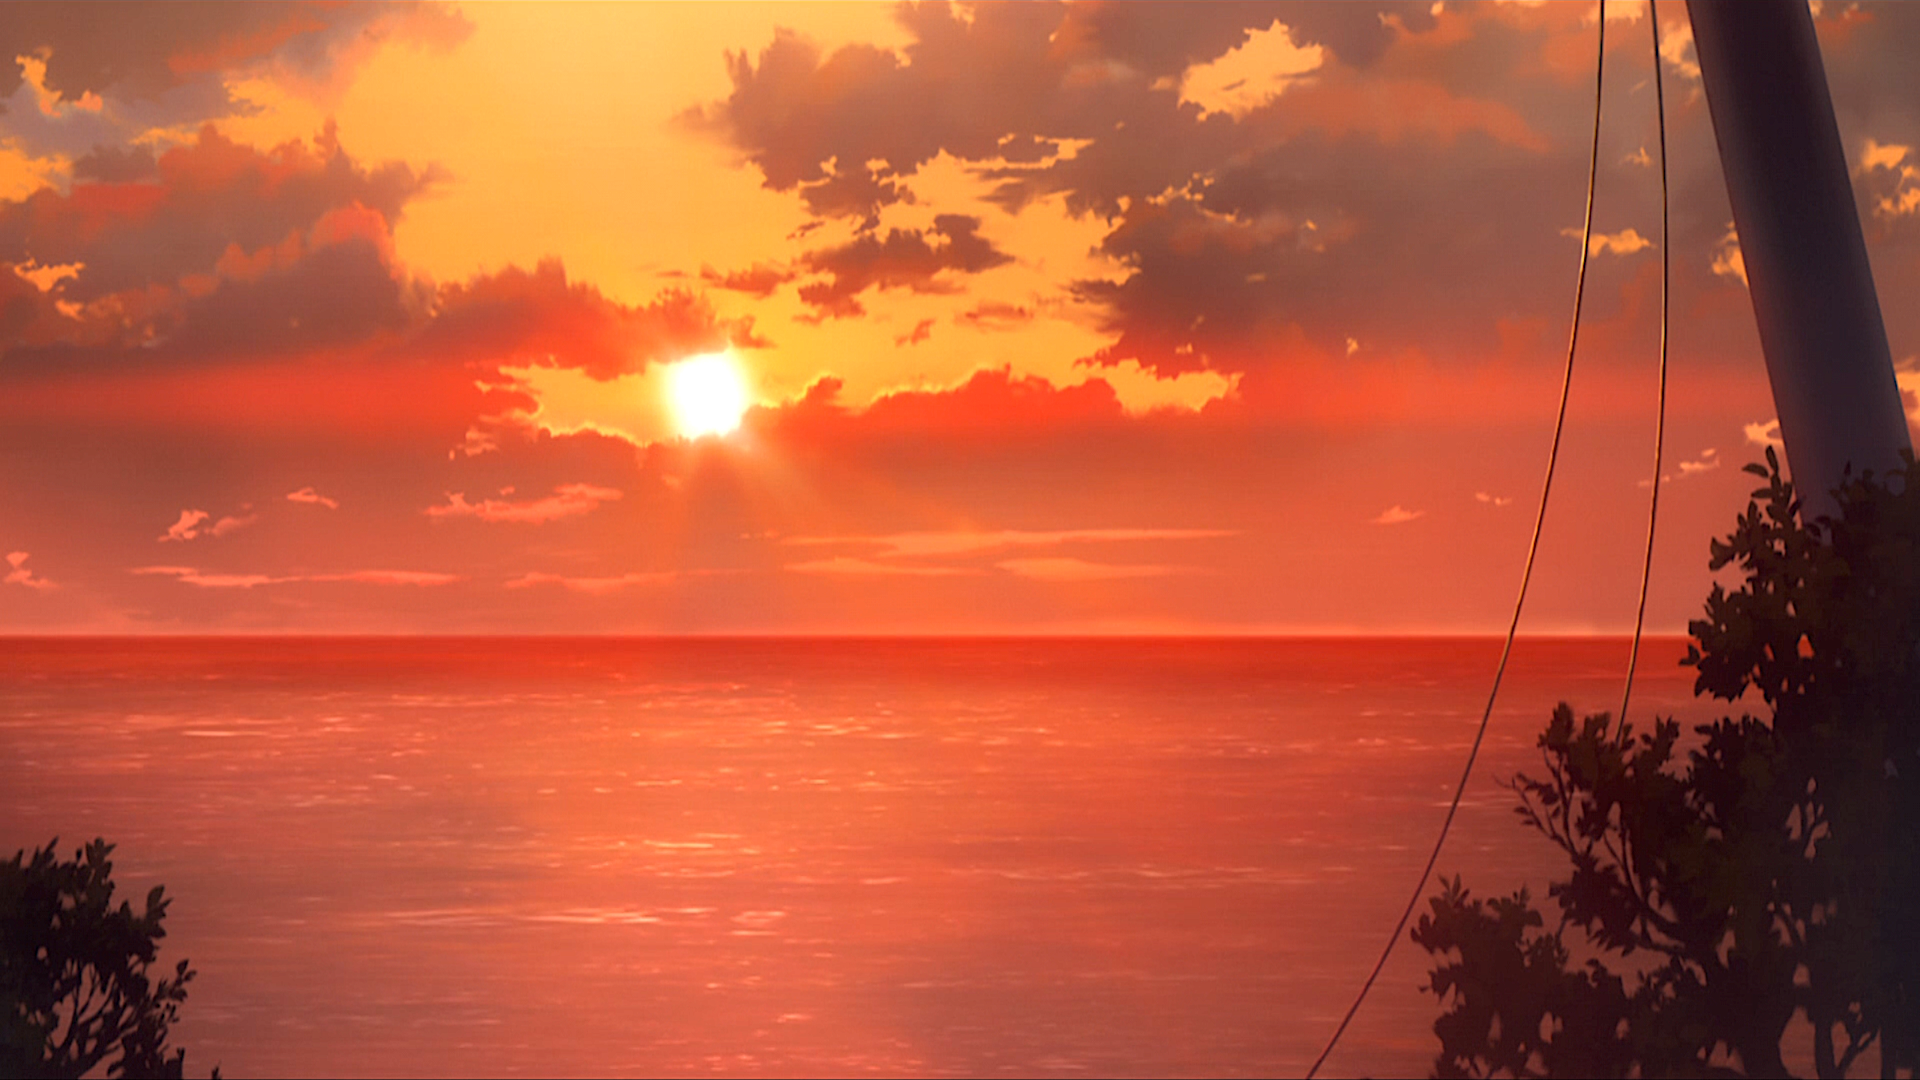 Anime Scenery Sunset Wallpaper Download | MobCup